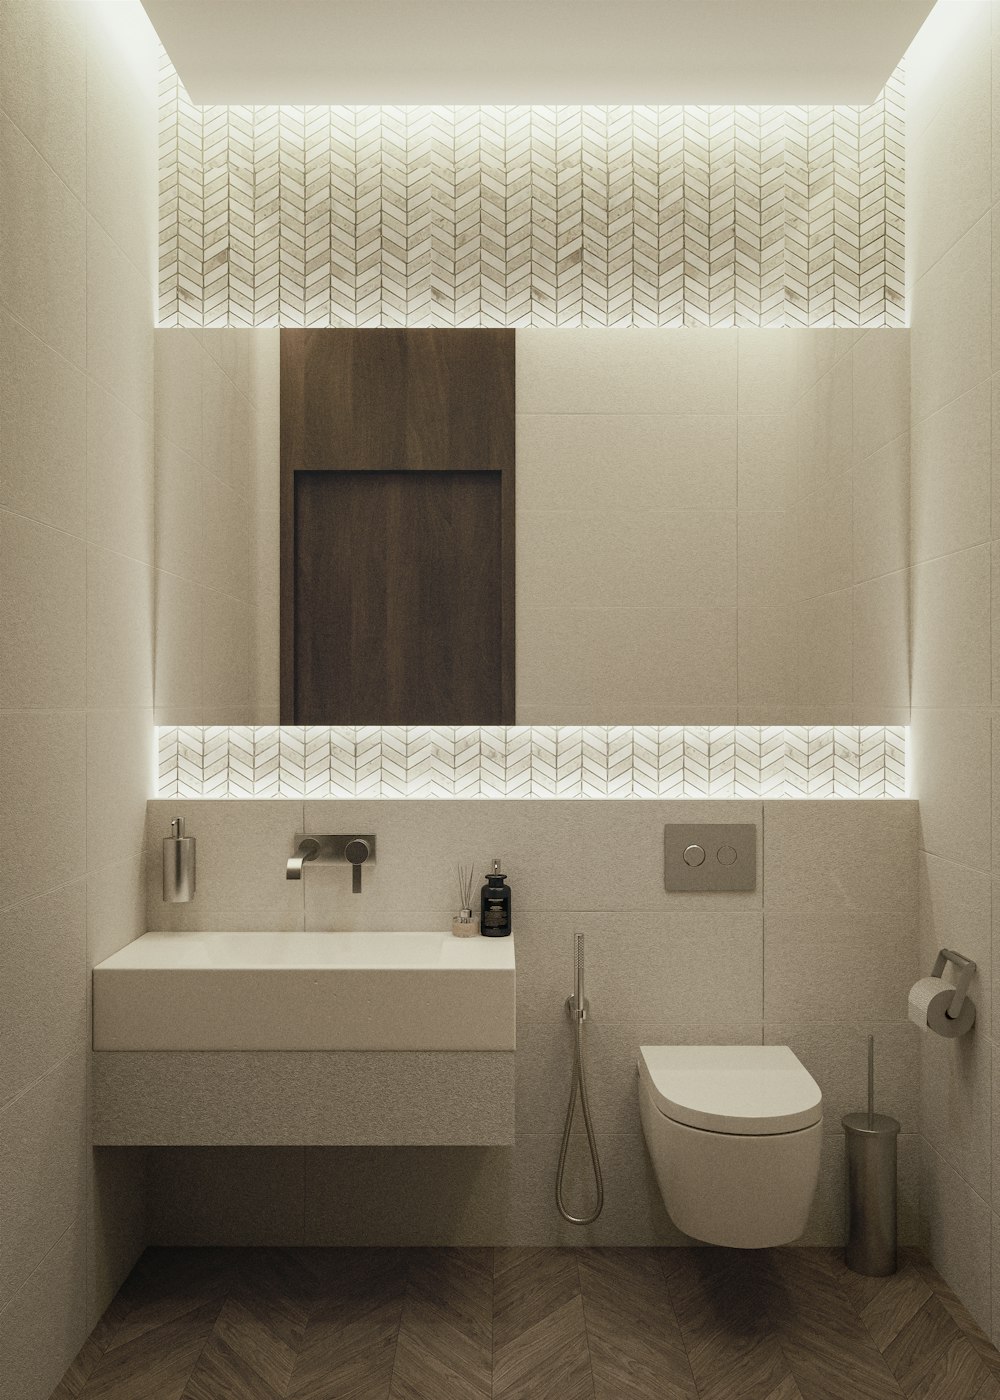 a bathroom with a toilet, sink and mirror